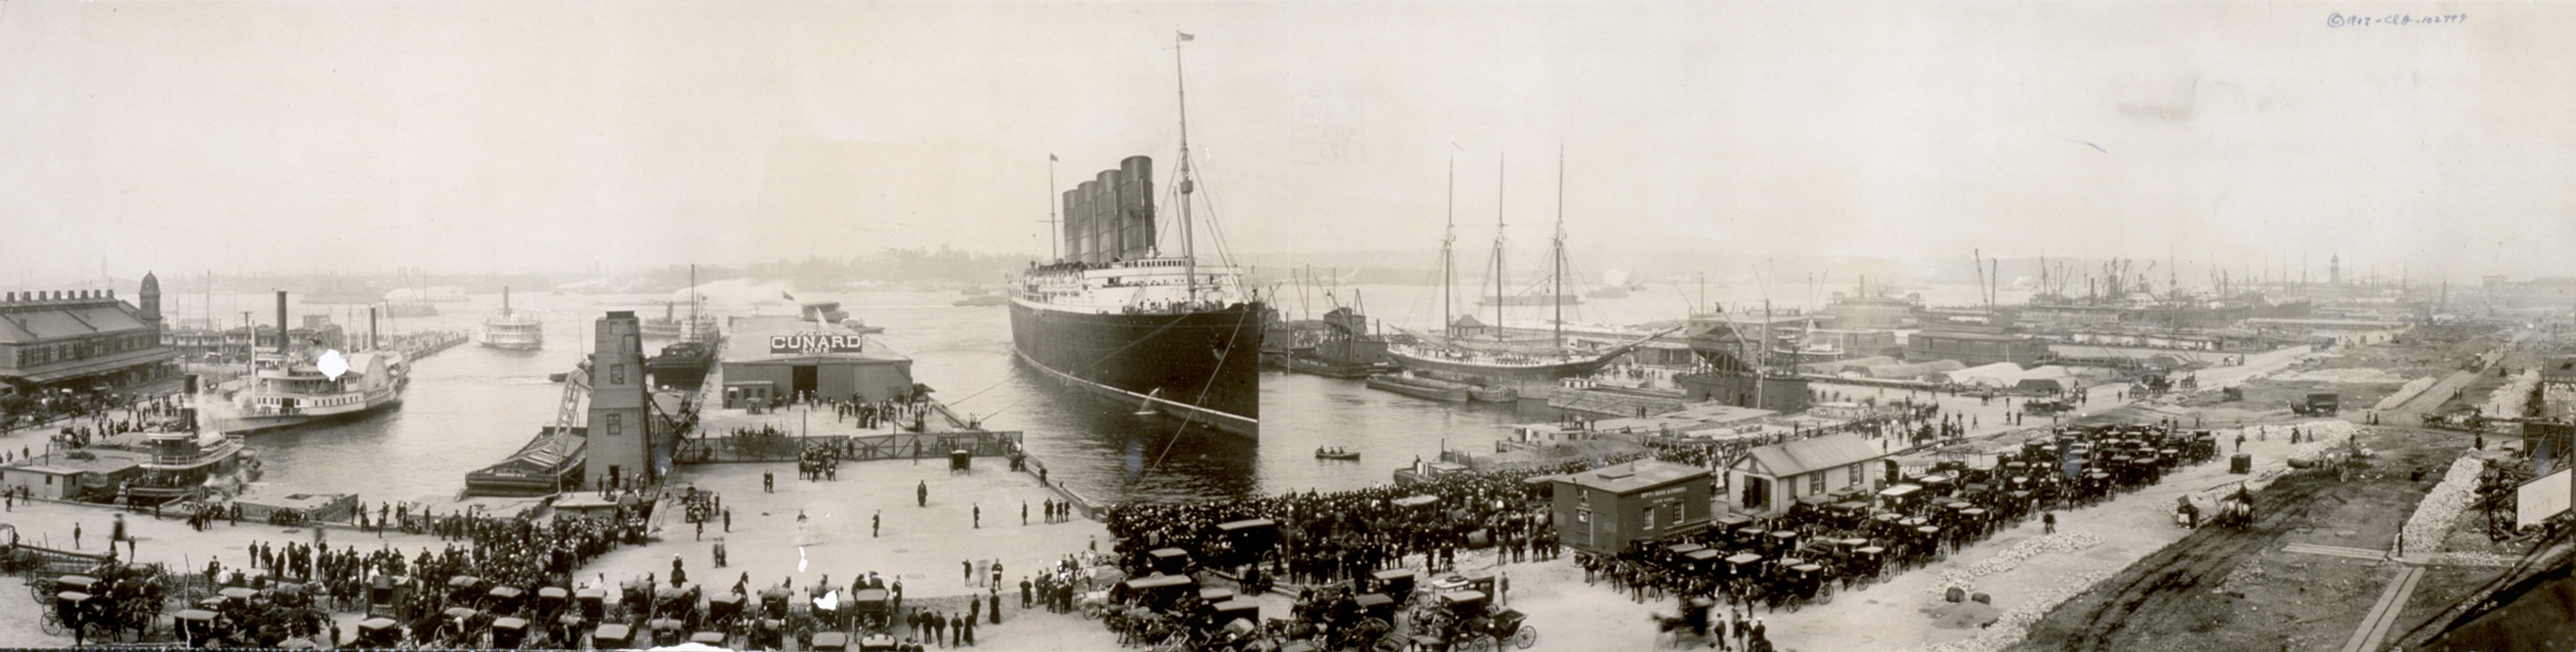 The_Lusitania_at_end_of_record_voyage_1907_LC-USZ62-64956.jpg